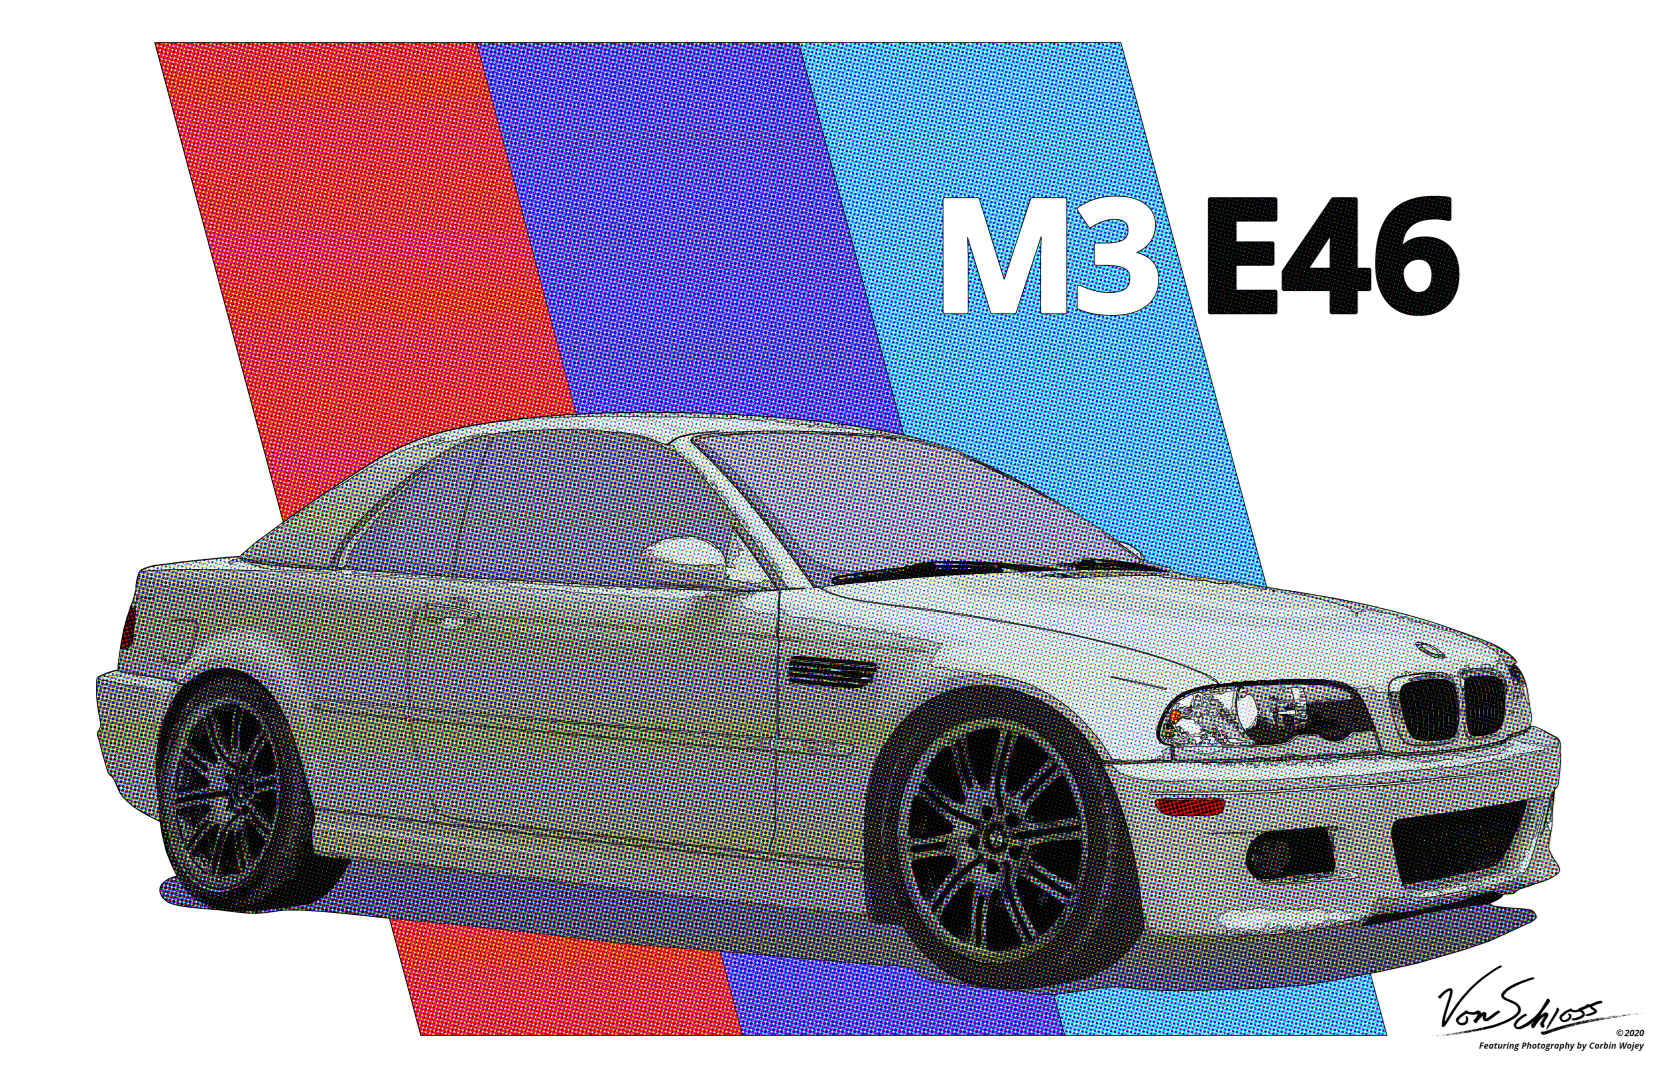 Poster of artwork designed to look like a vintage newspaper advertisement of a BMW M3 E46. Dark outlines and light pastel colors.